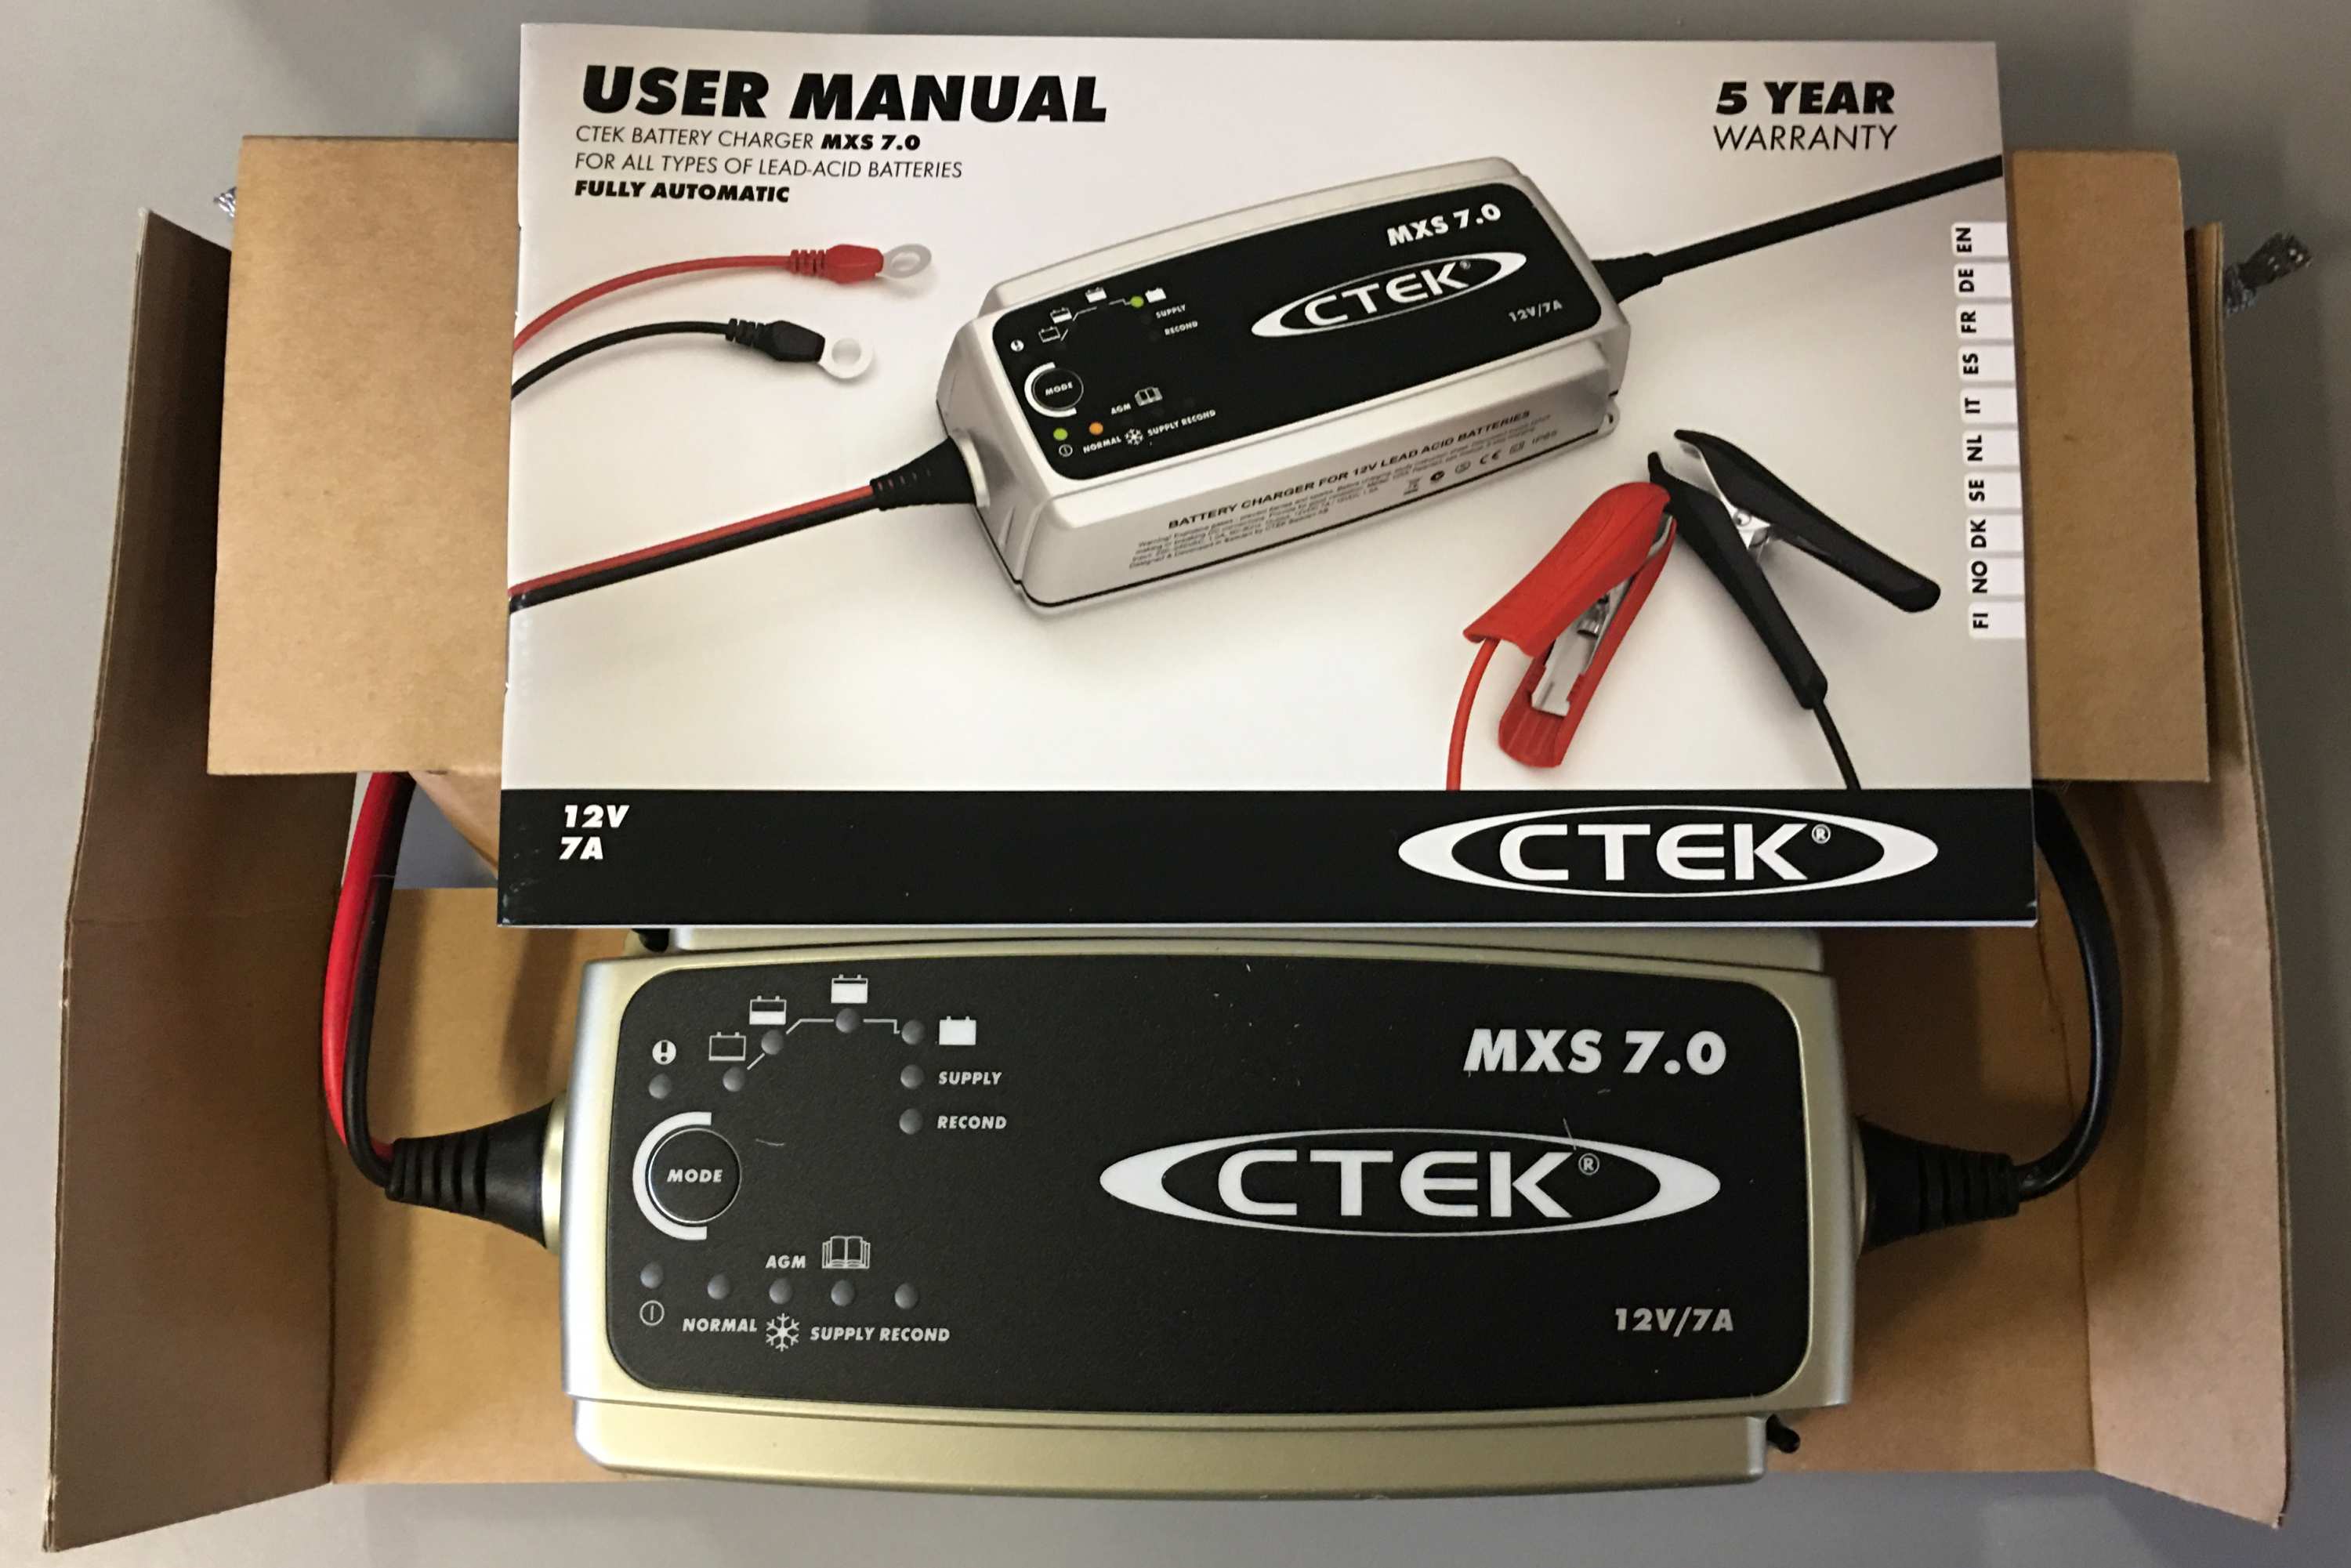 Charges, Maintains and Reconditions Car, Caravan & Motorhome batteries UK Plug 12V 7 Amp CTEK MXS 7.0 Fully Automatic Battery Charger